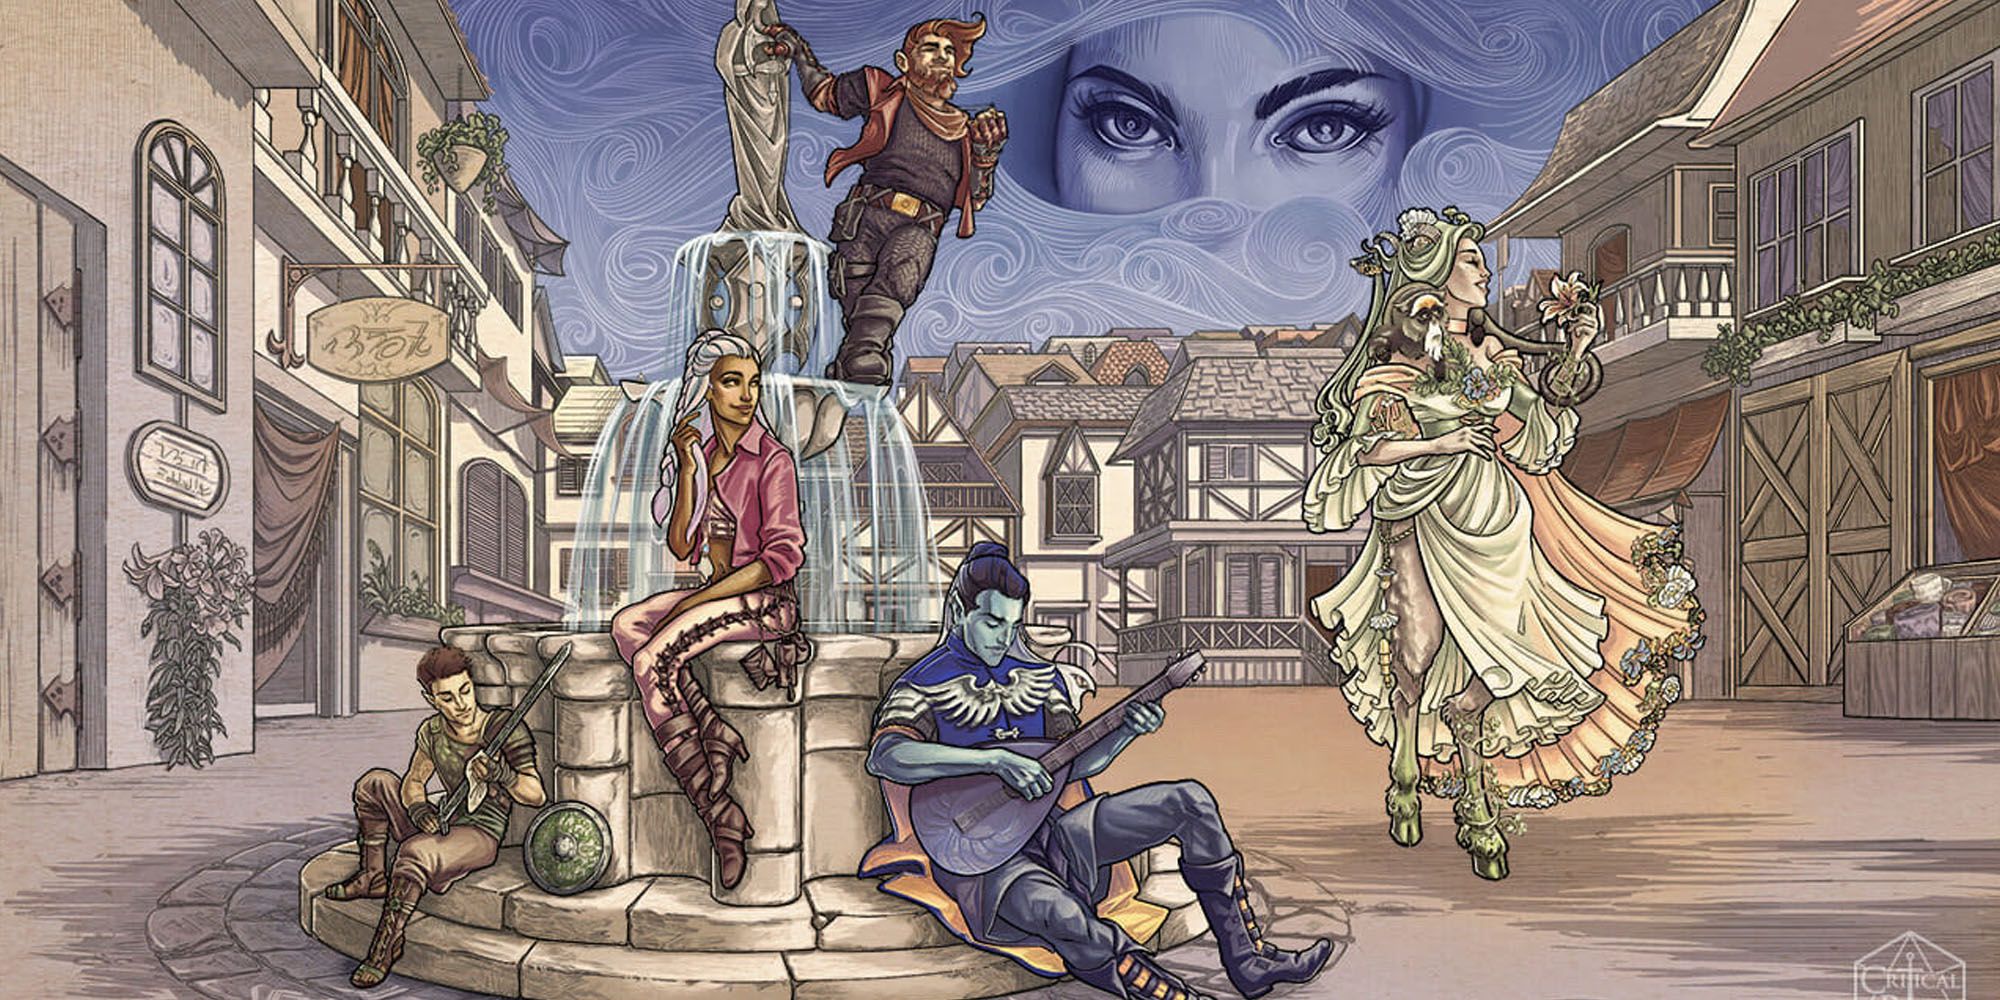 Critical Role's Exandria Unlimited official art